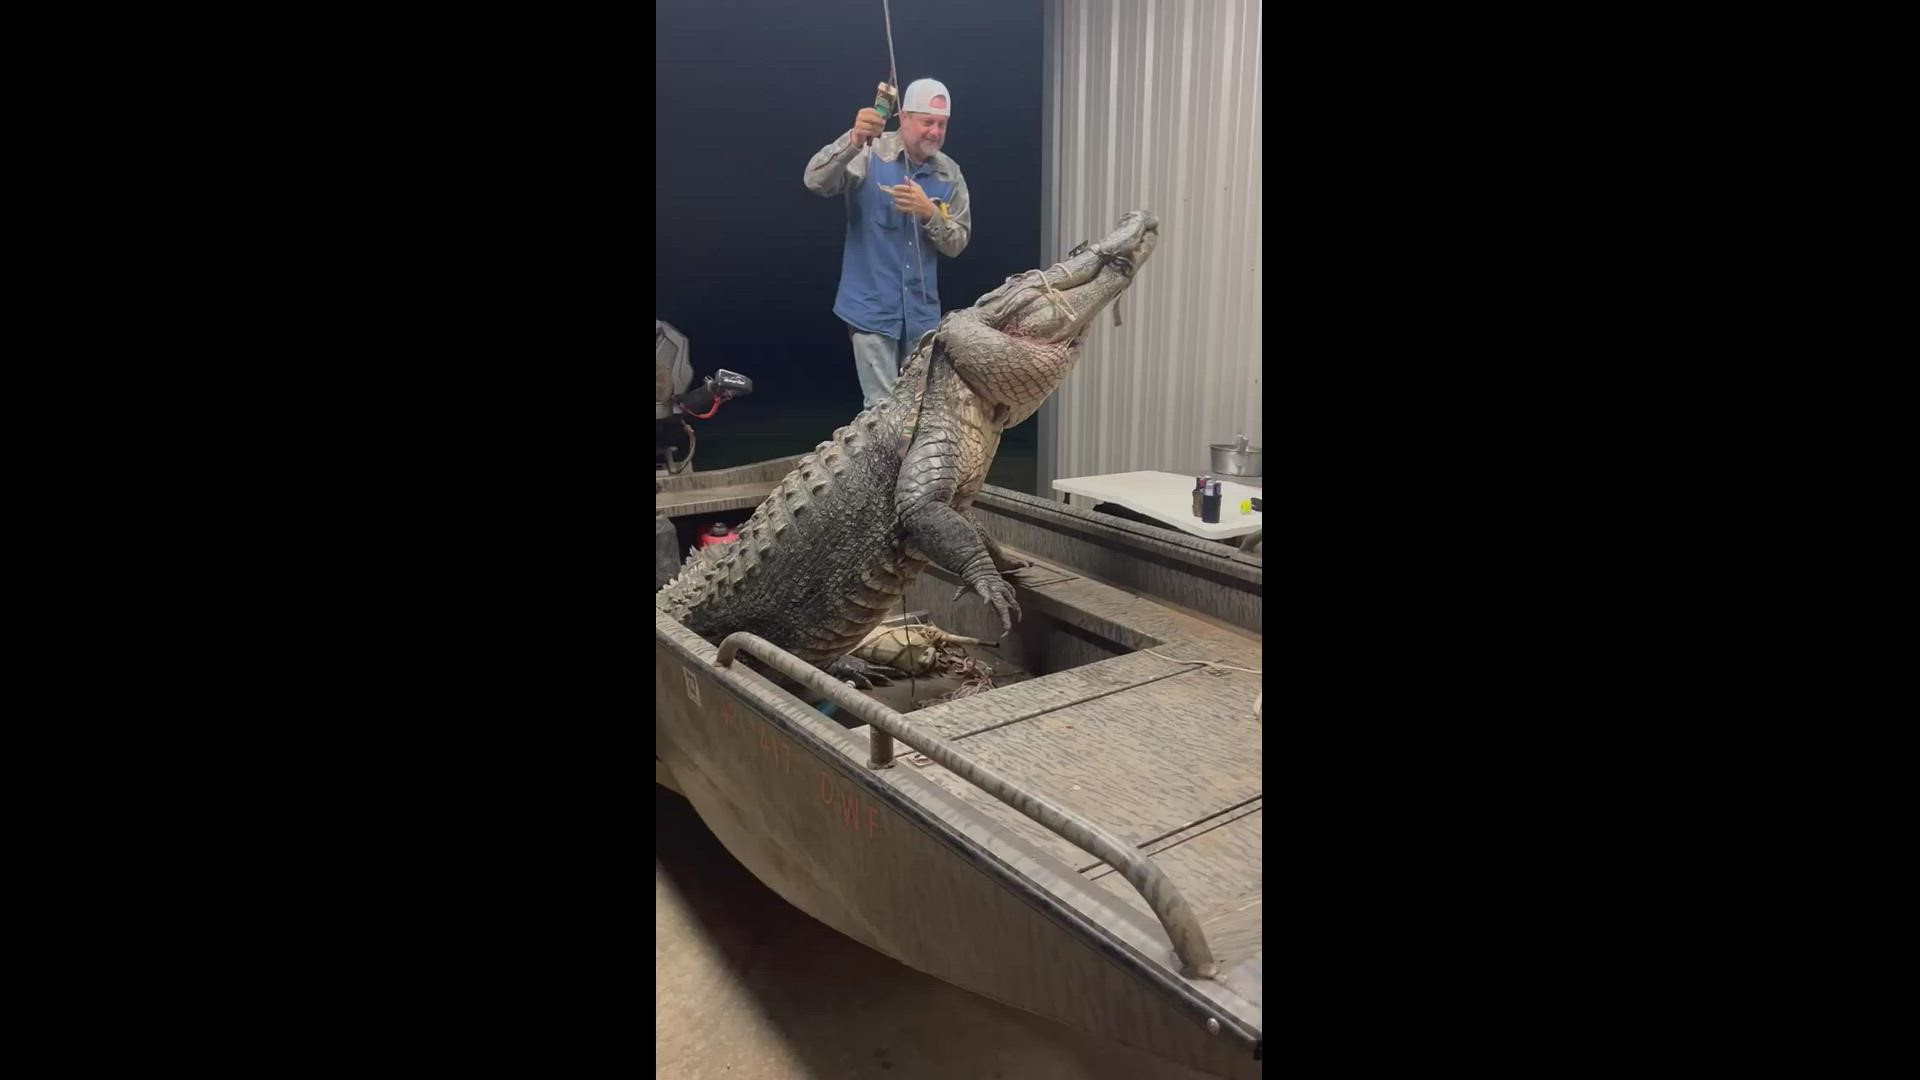 Jagger East, his friend Carson Bumgarnder, and cousin Gil Elam have been the talk of the town ever since they wrangled up a huge "monster" gator on the Sulphur River